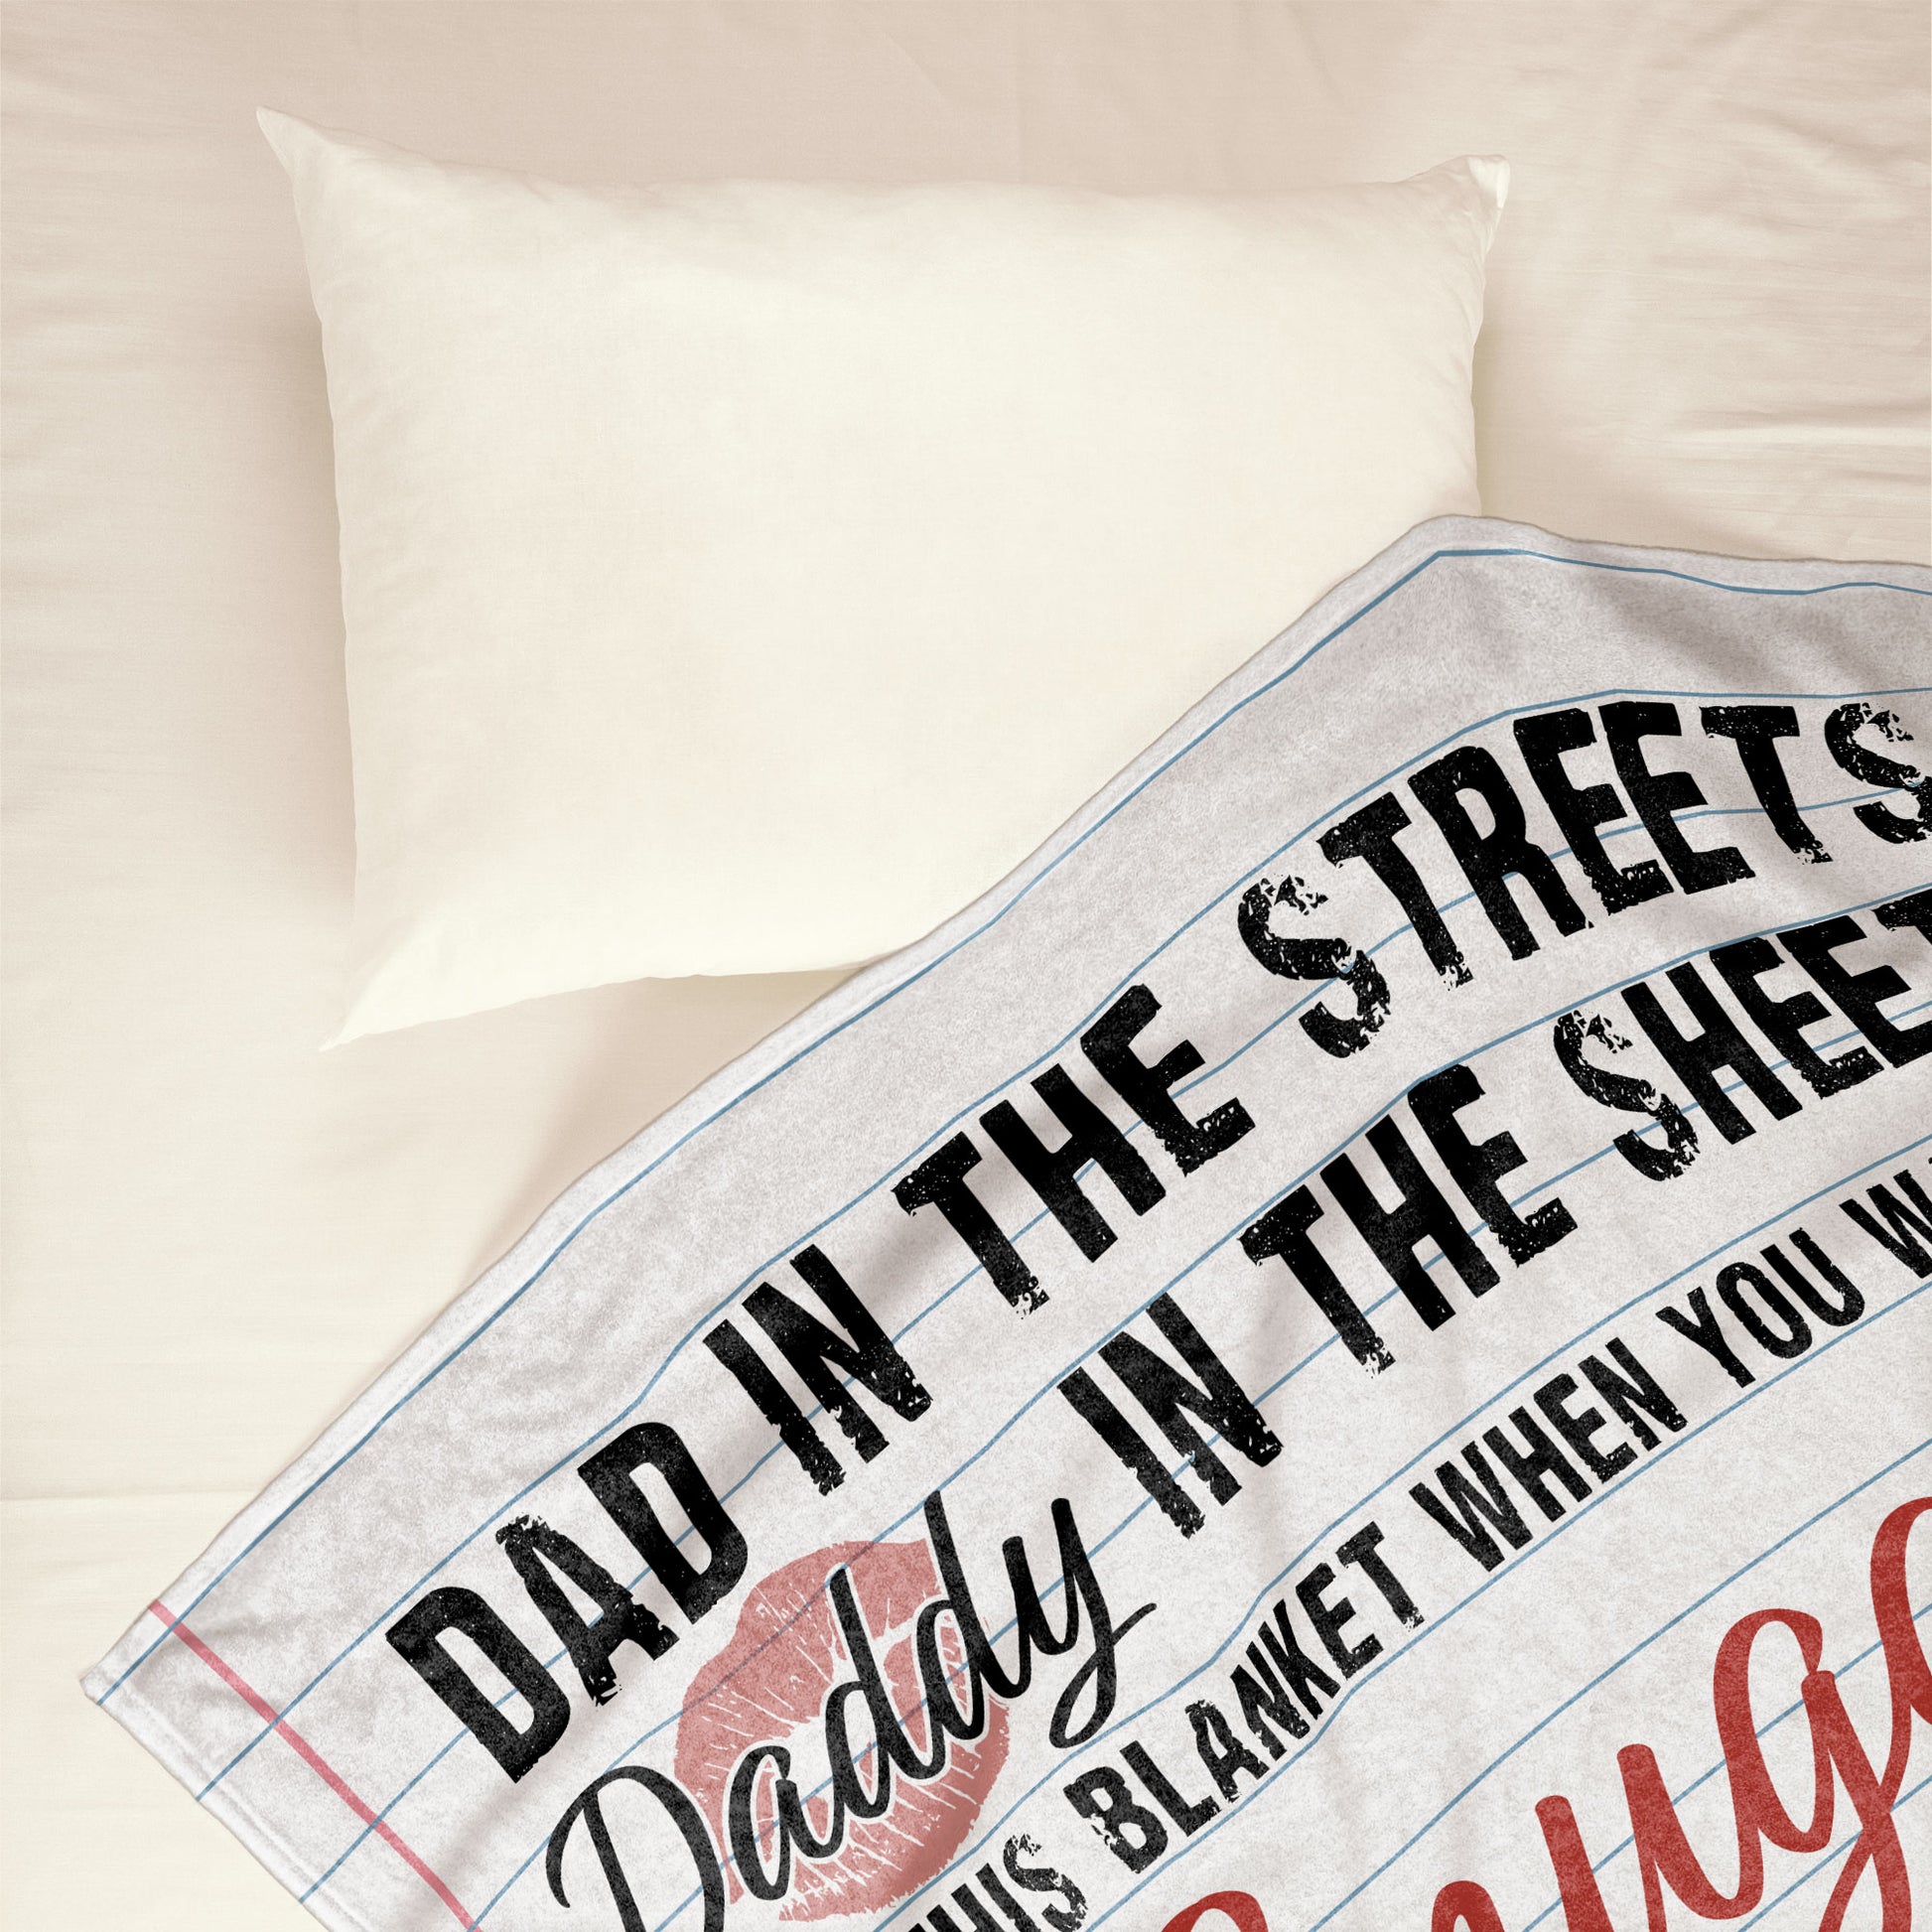 Daddy In The Sheets - Personalized Blanket - Father's Day, Birthday, Funny Gift For Husband, Lover, Life Partner, Boyfriend - From Wife, Girlfriend